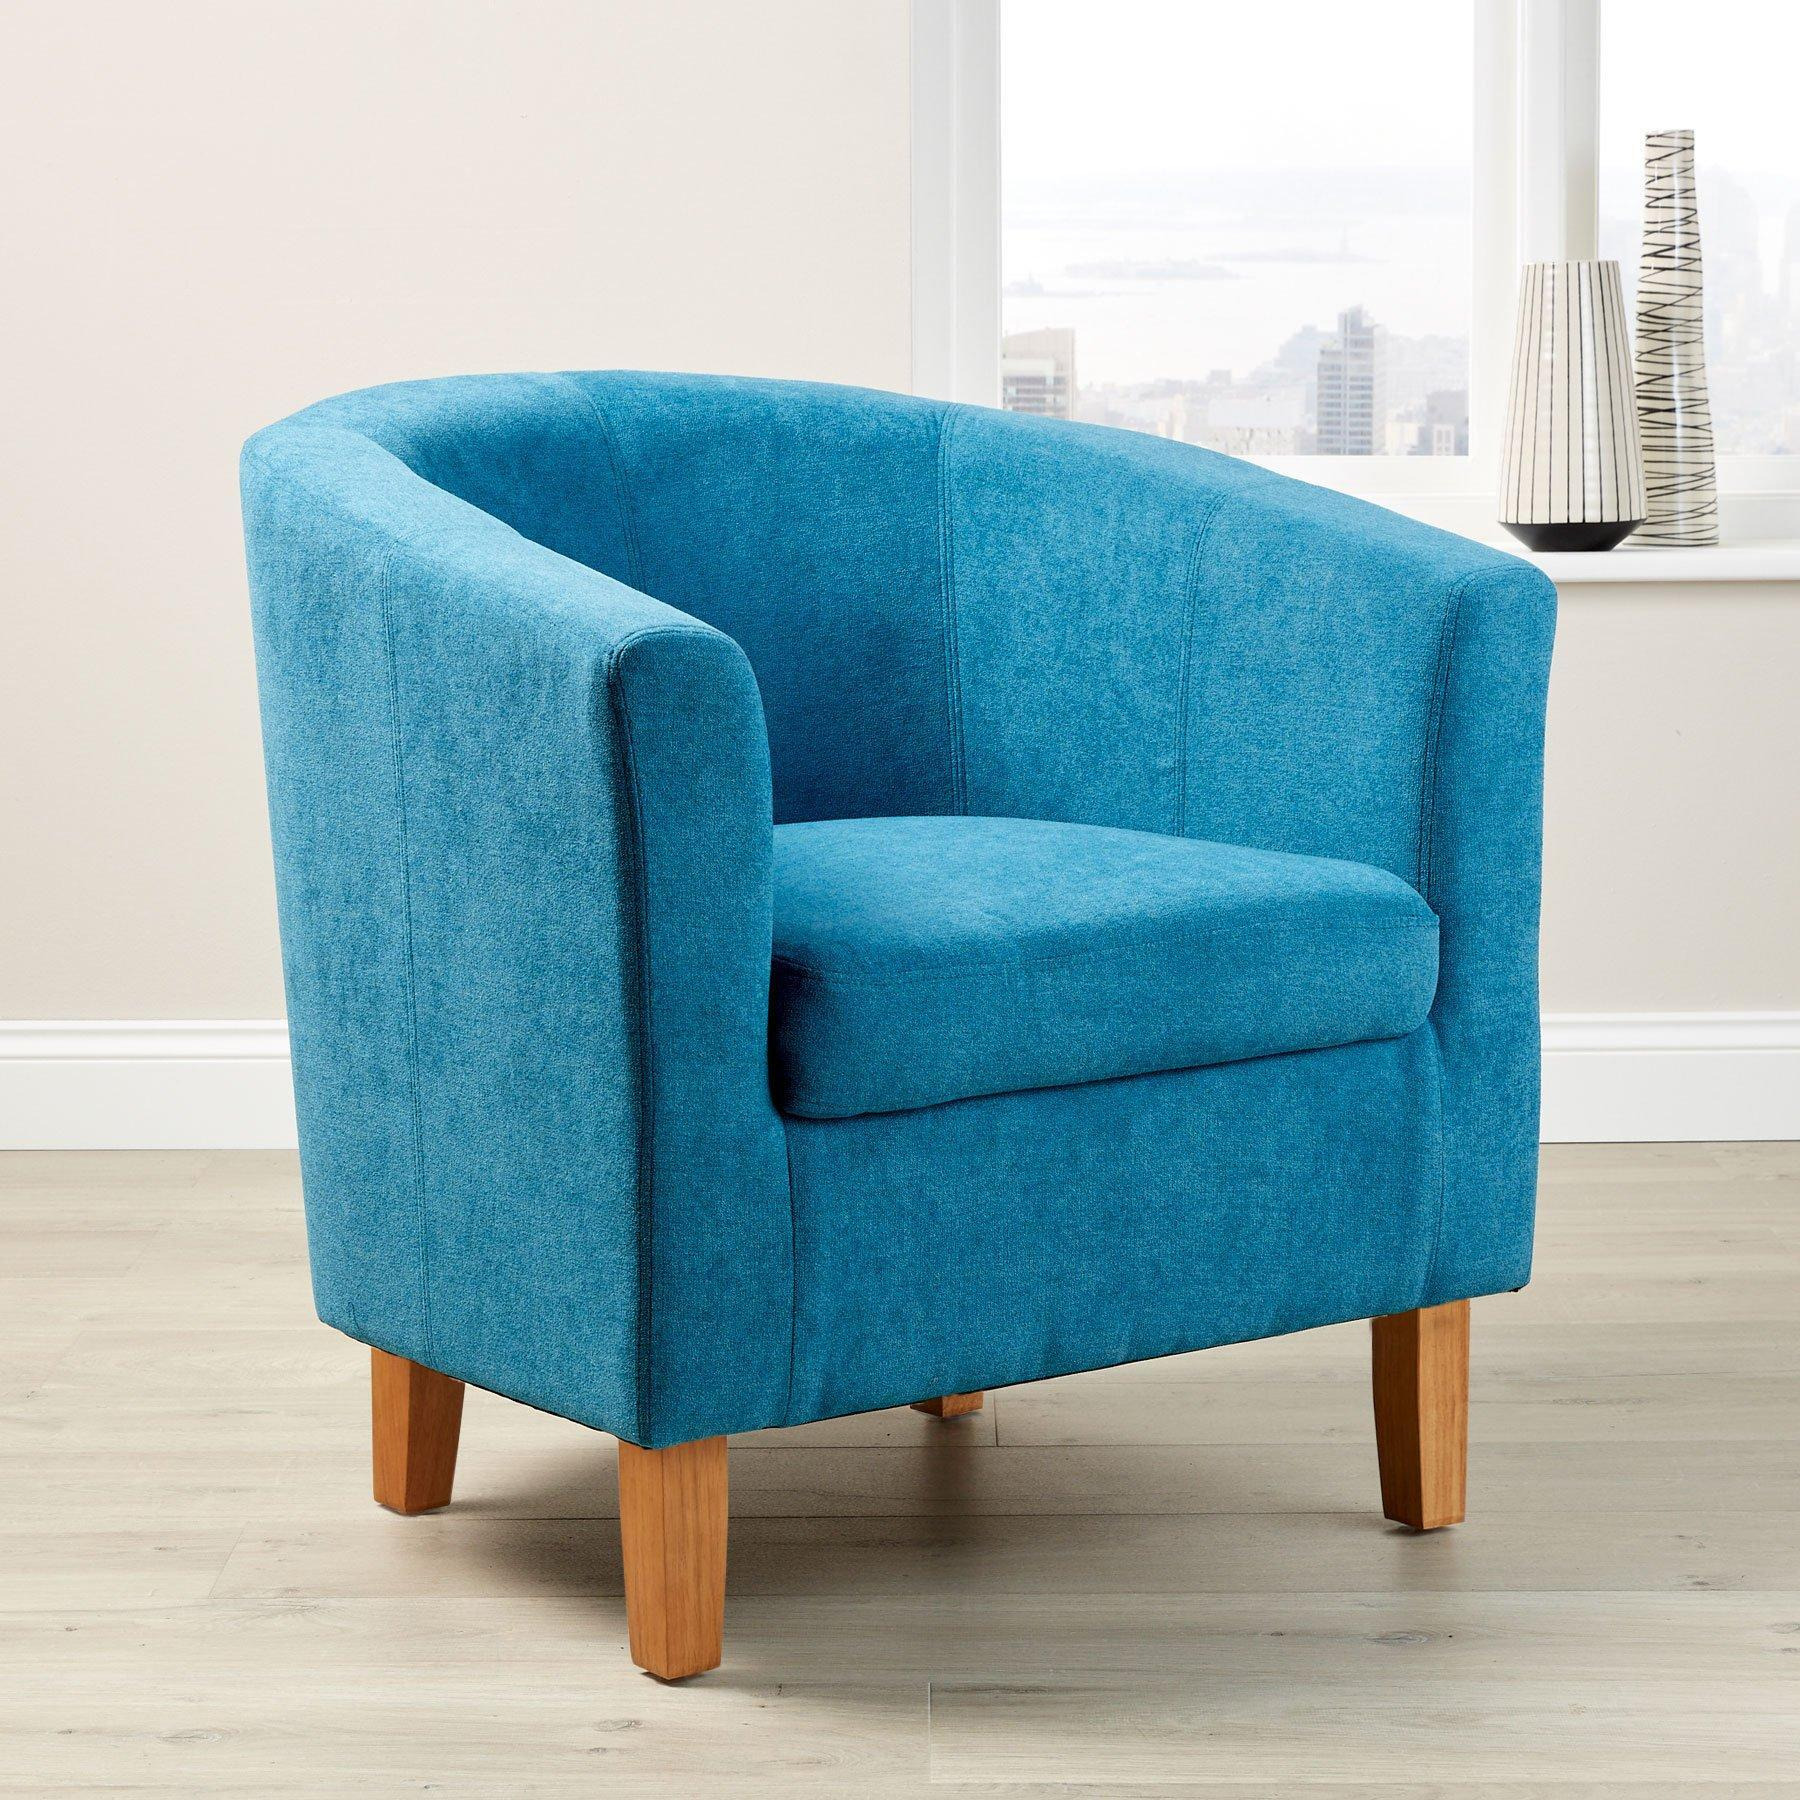 Bedford Small Padded Occasional Accent Tub Chair - image 1